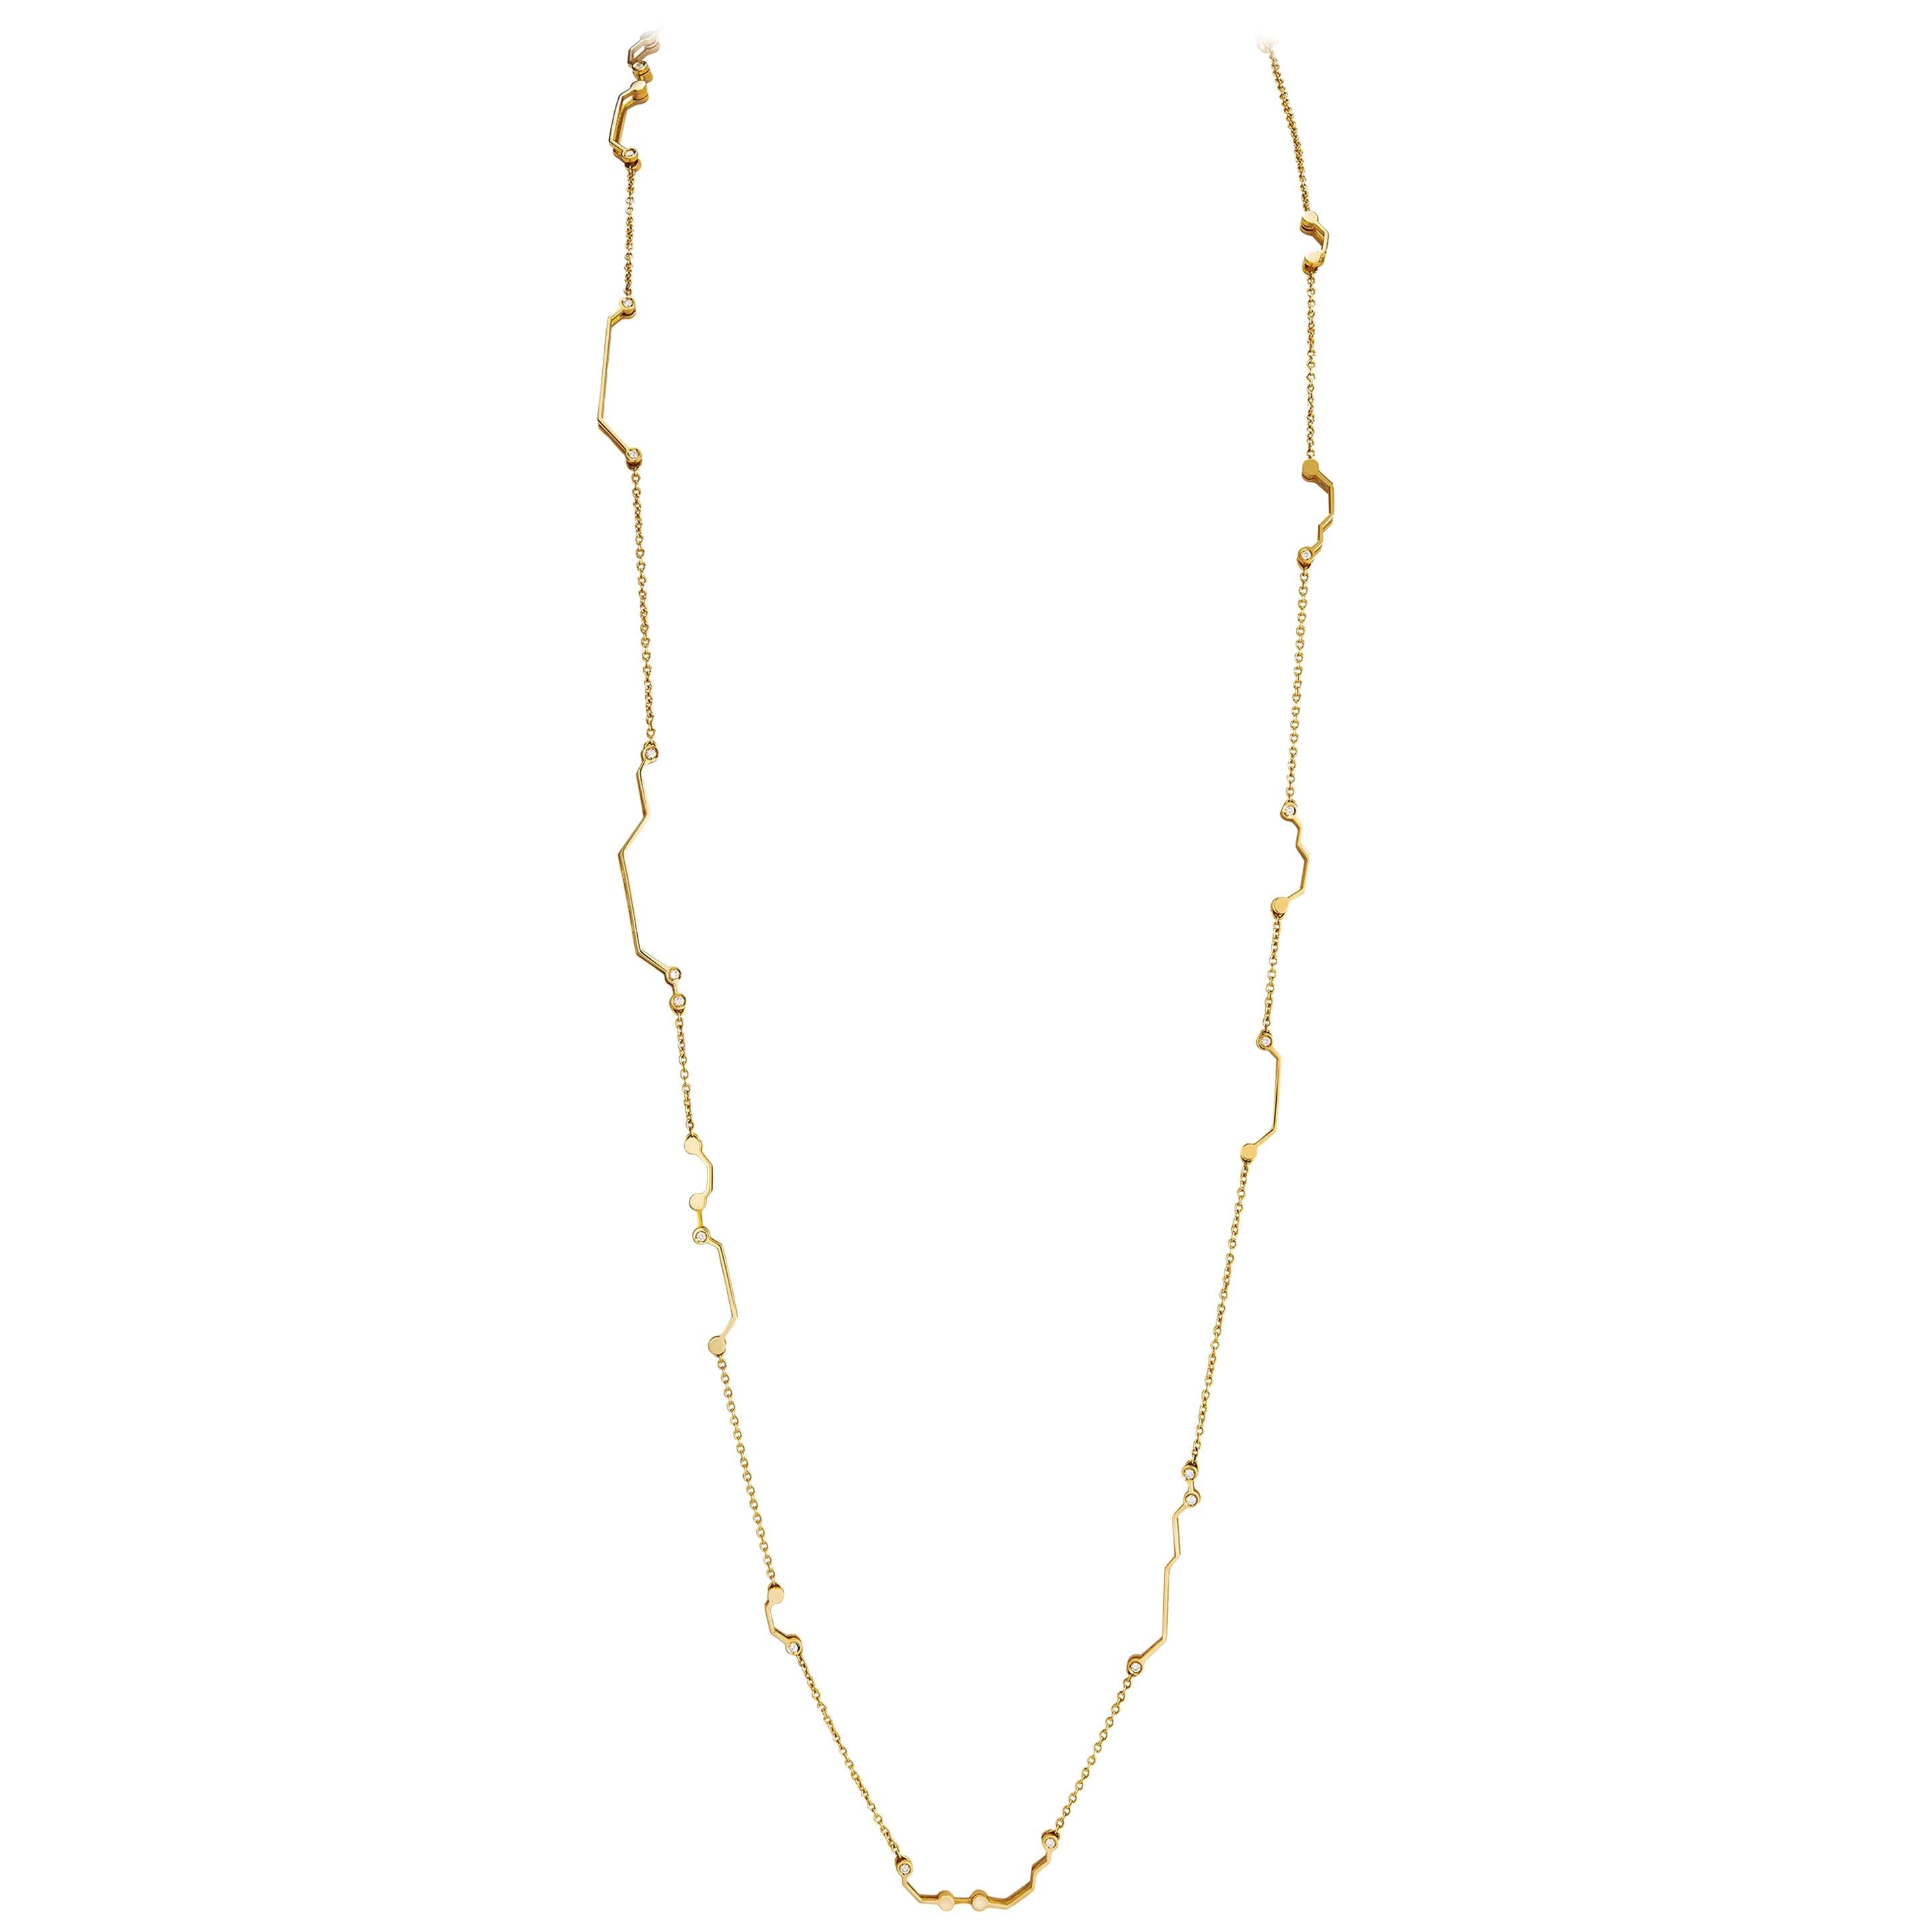 Women's or Men's Nathalie Jean Contemporary 0.468 Carat Diamond Yellow Gold Link Chain Necklace For Sale